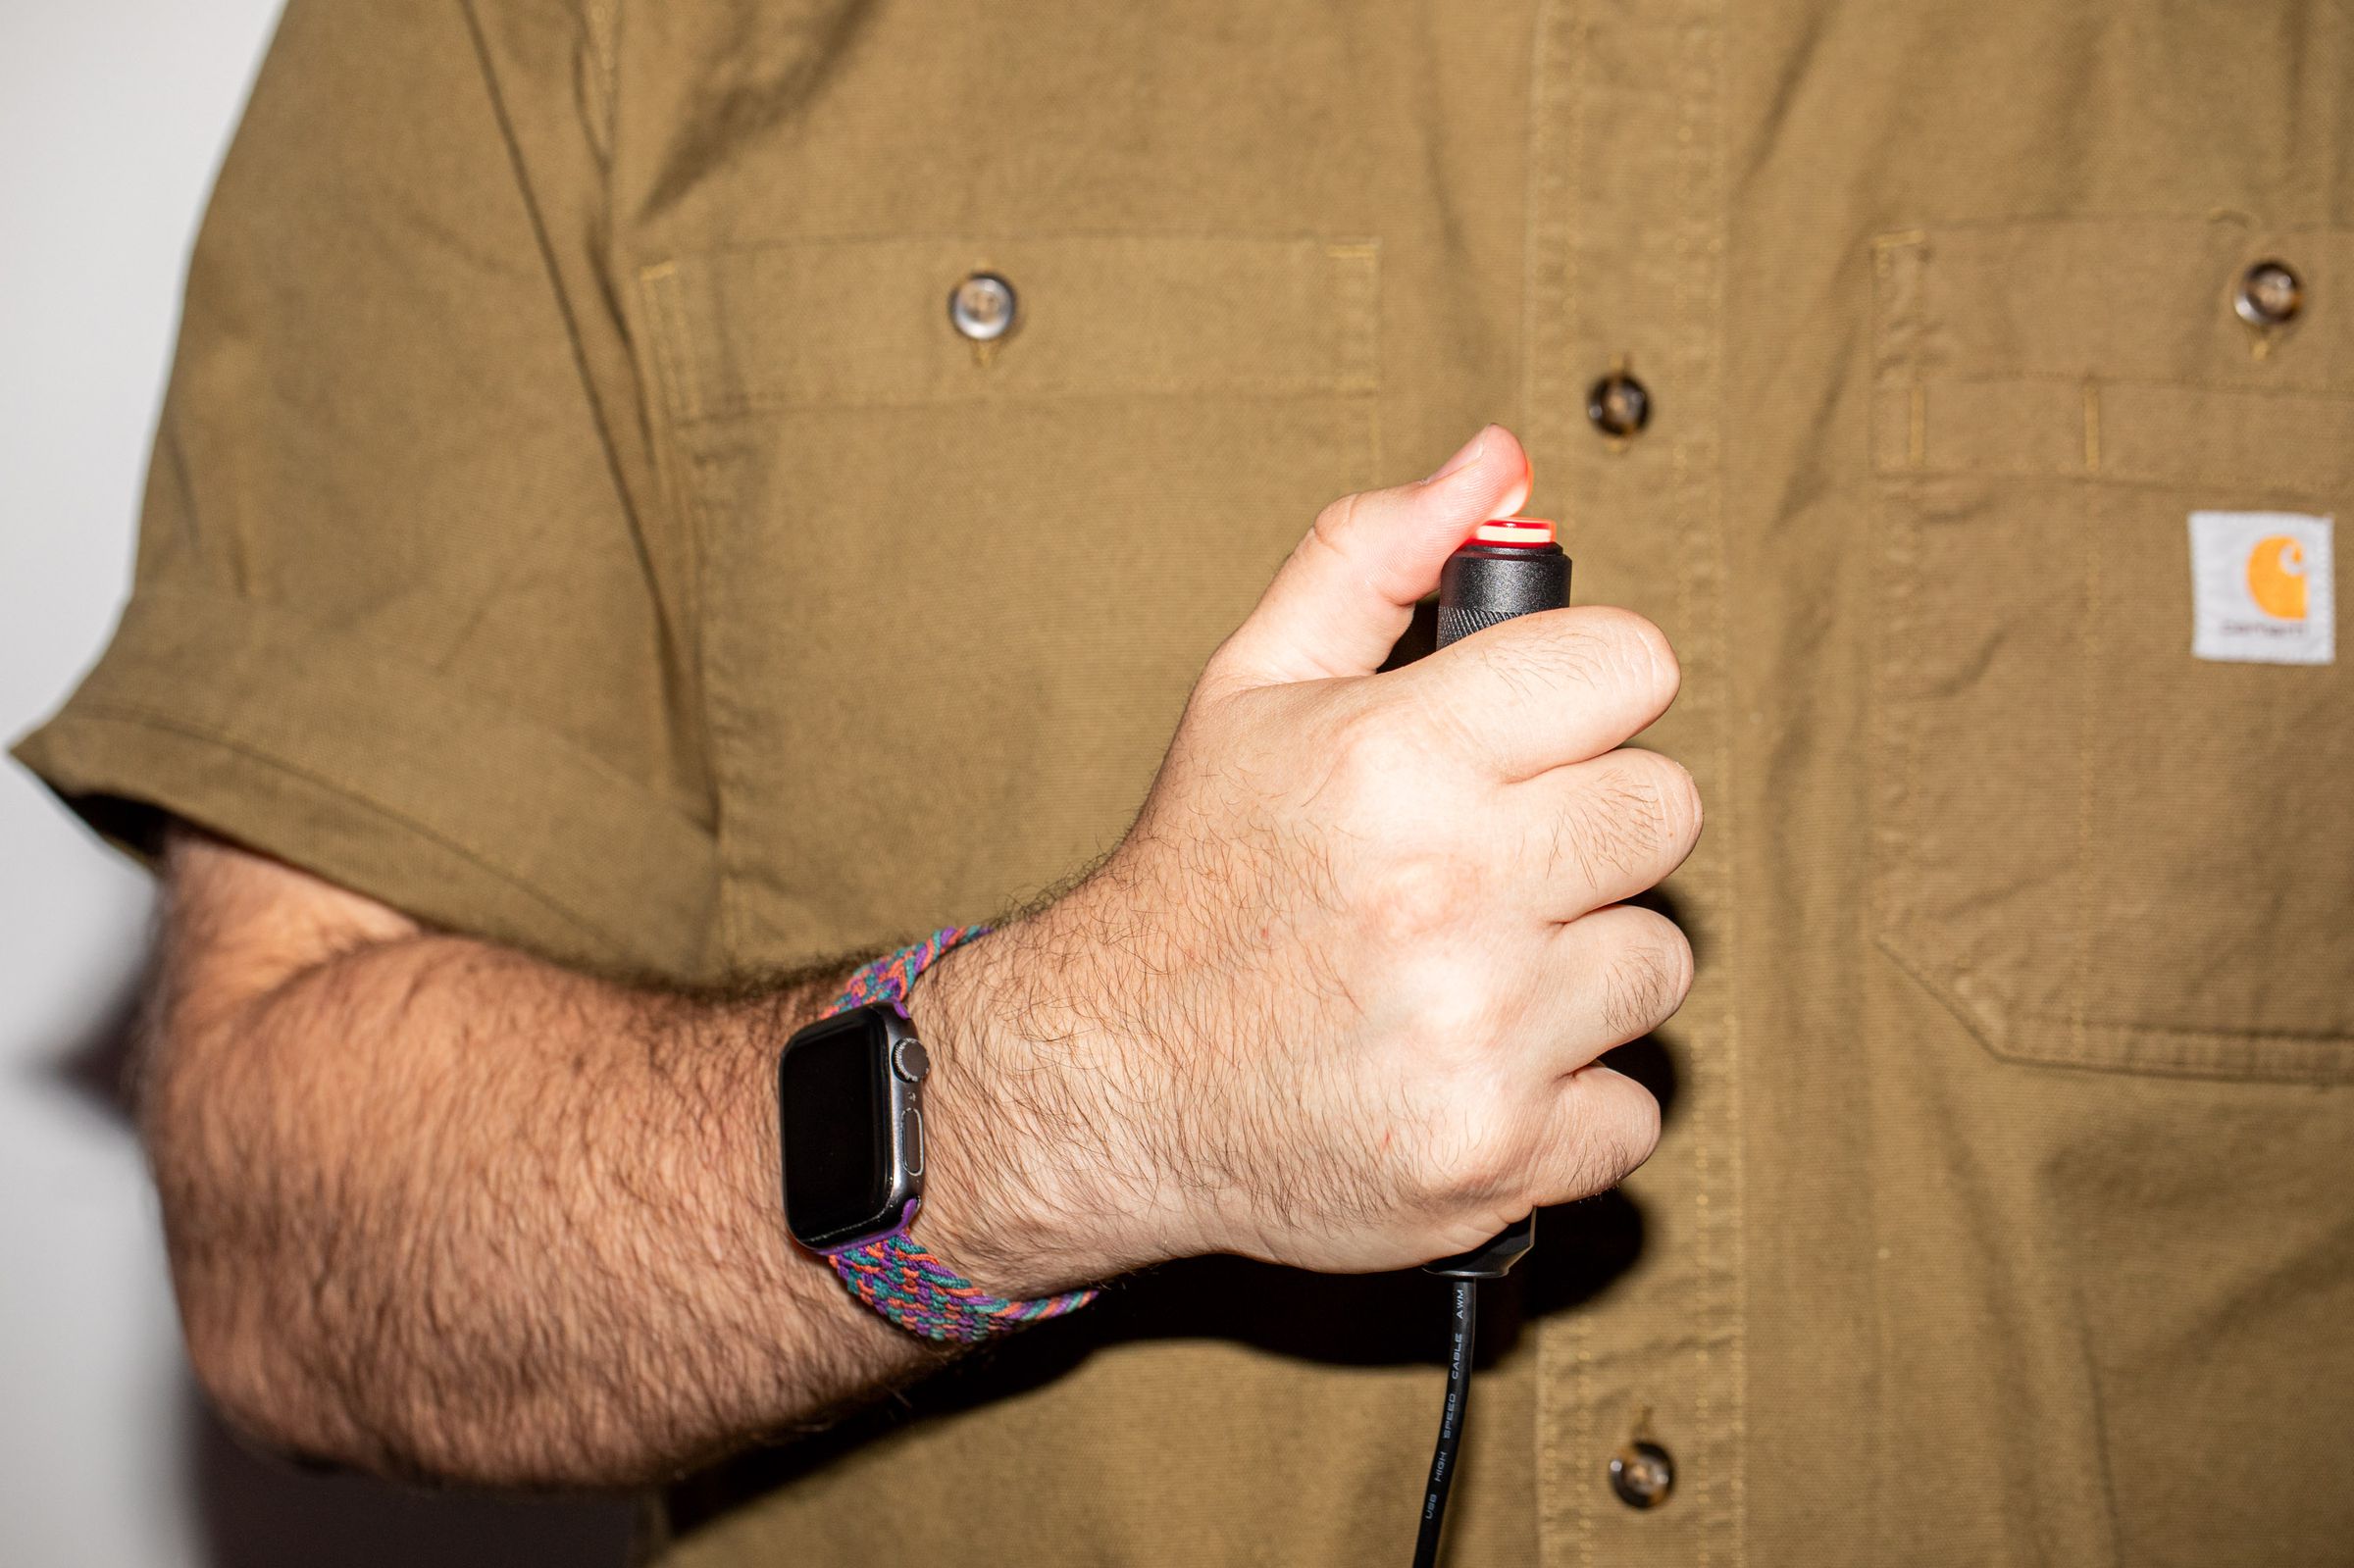 A hand holding the Delcom buzzer against the chest.